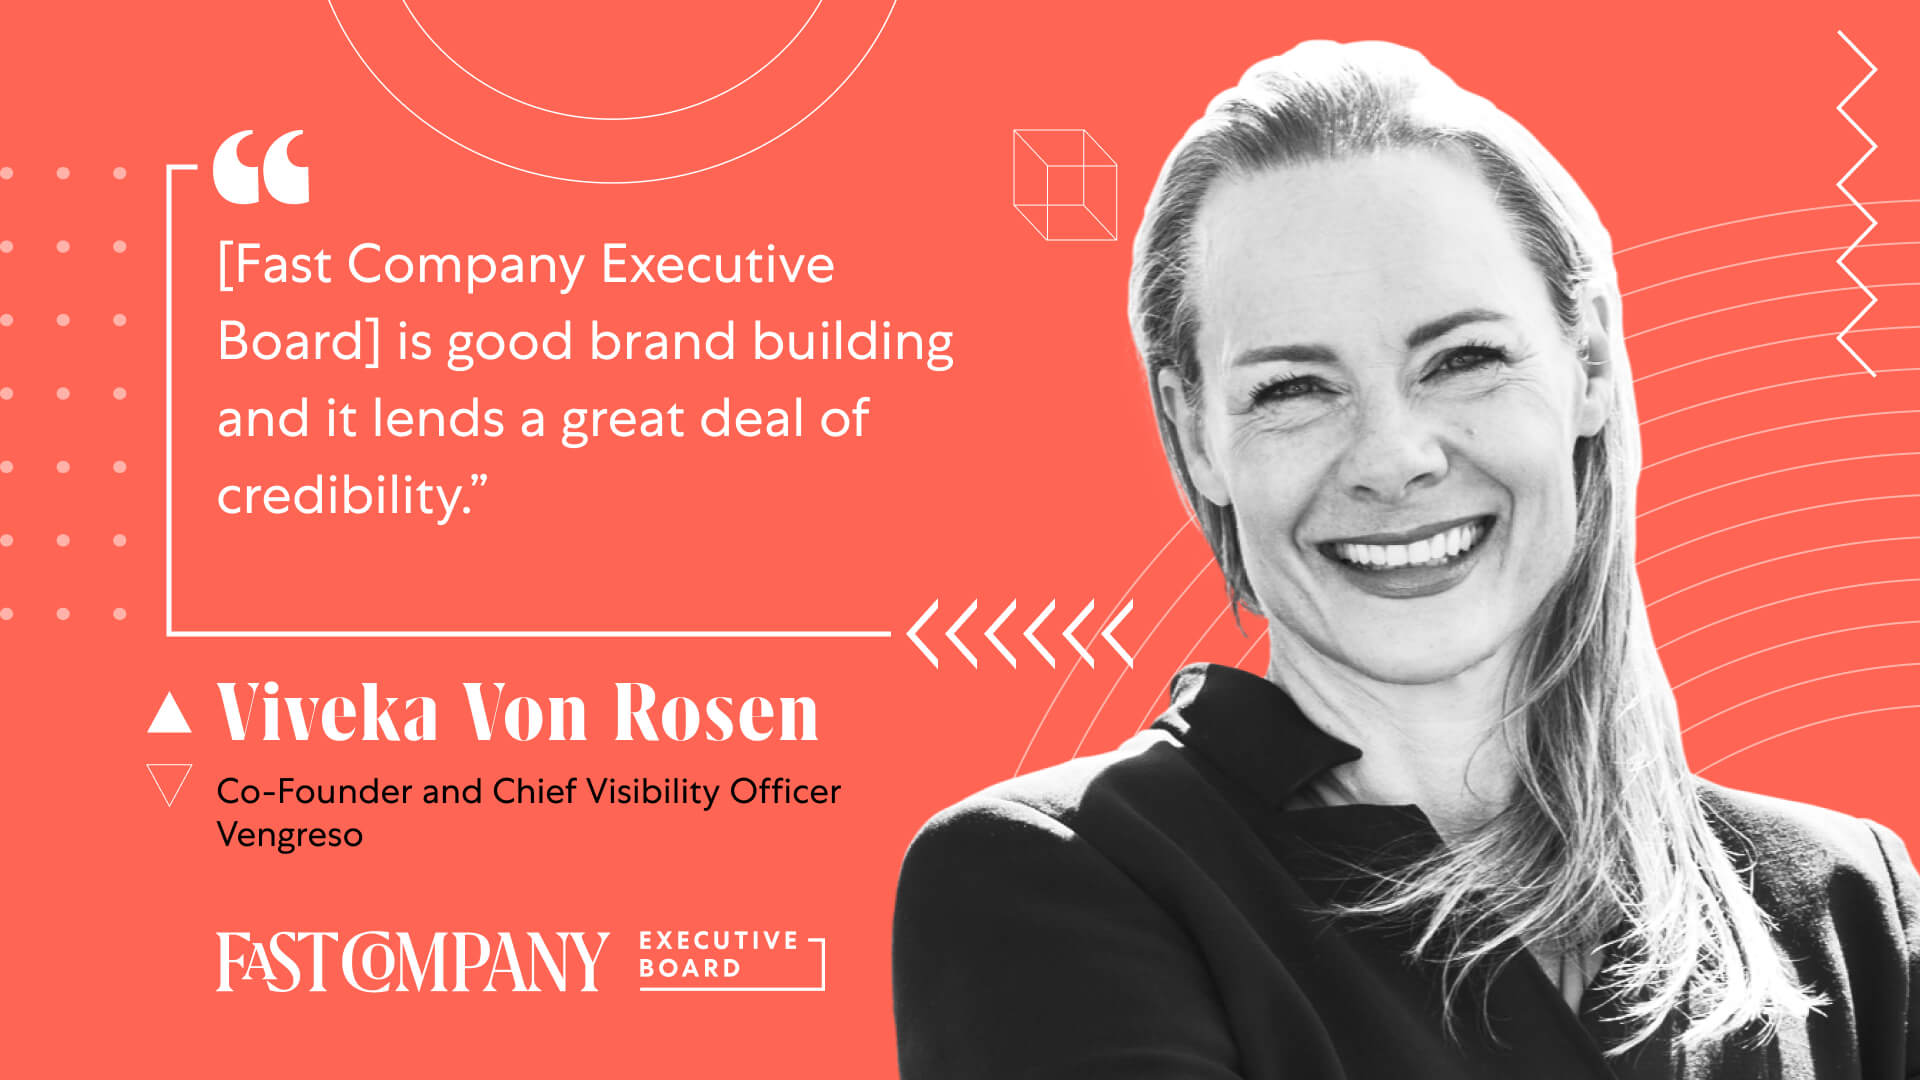 For Viveka von Rosen, Fast Company Executive Board Yields Added Credibility and a Boost in LinkedIn Followers